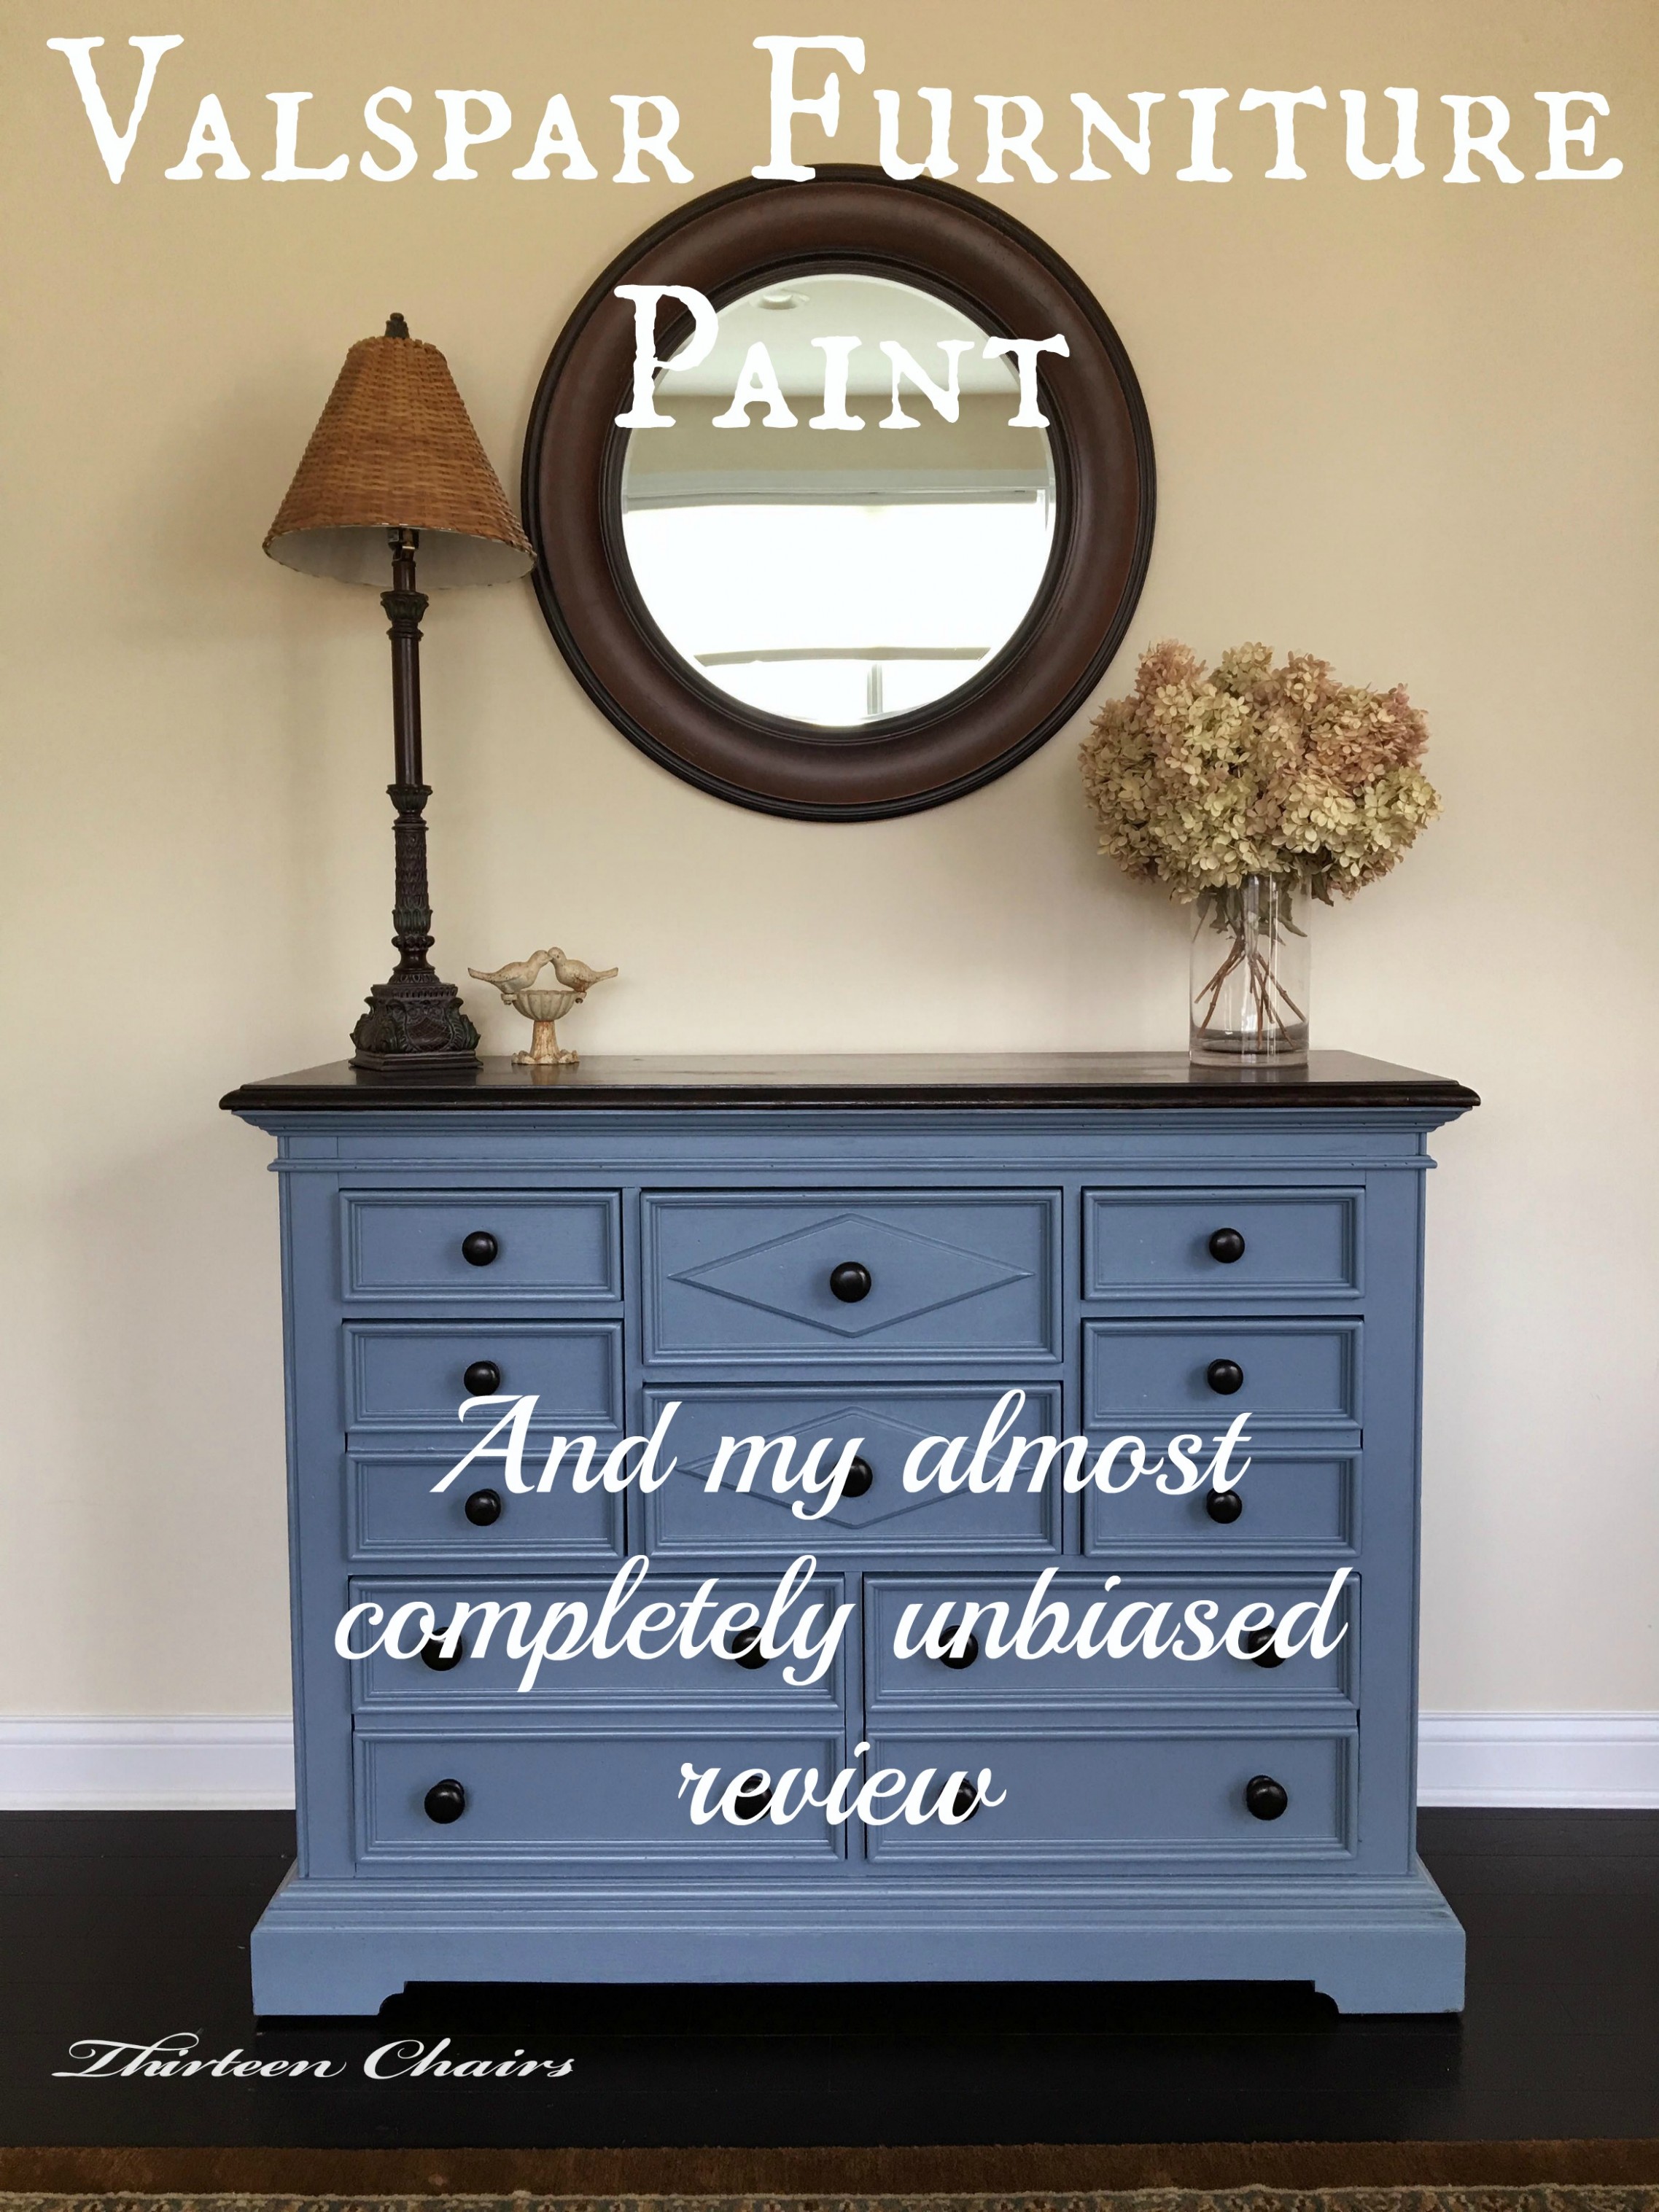 Painting With Valspar Furniture Paint Can You Paint Over Chalk Paint With Enamel